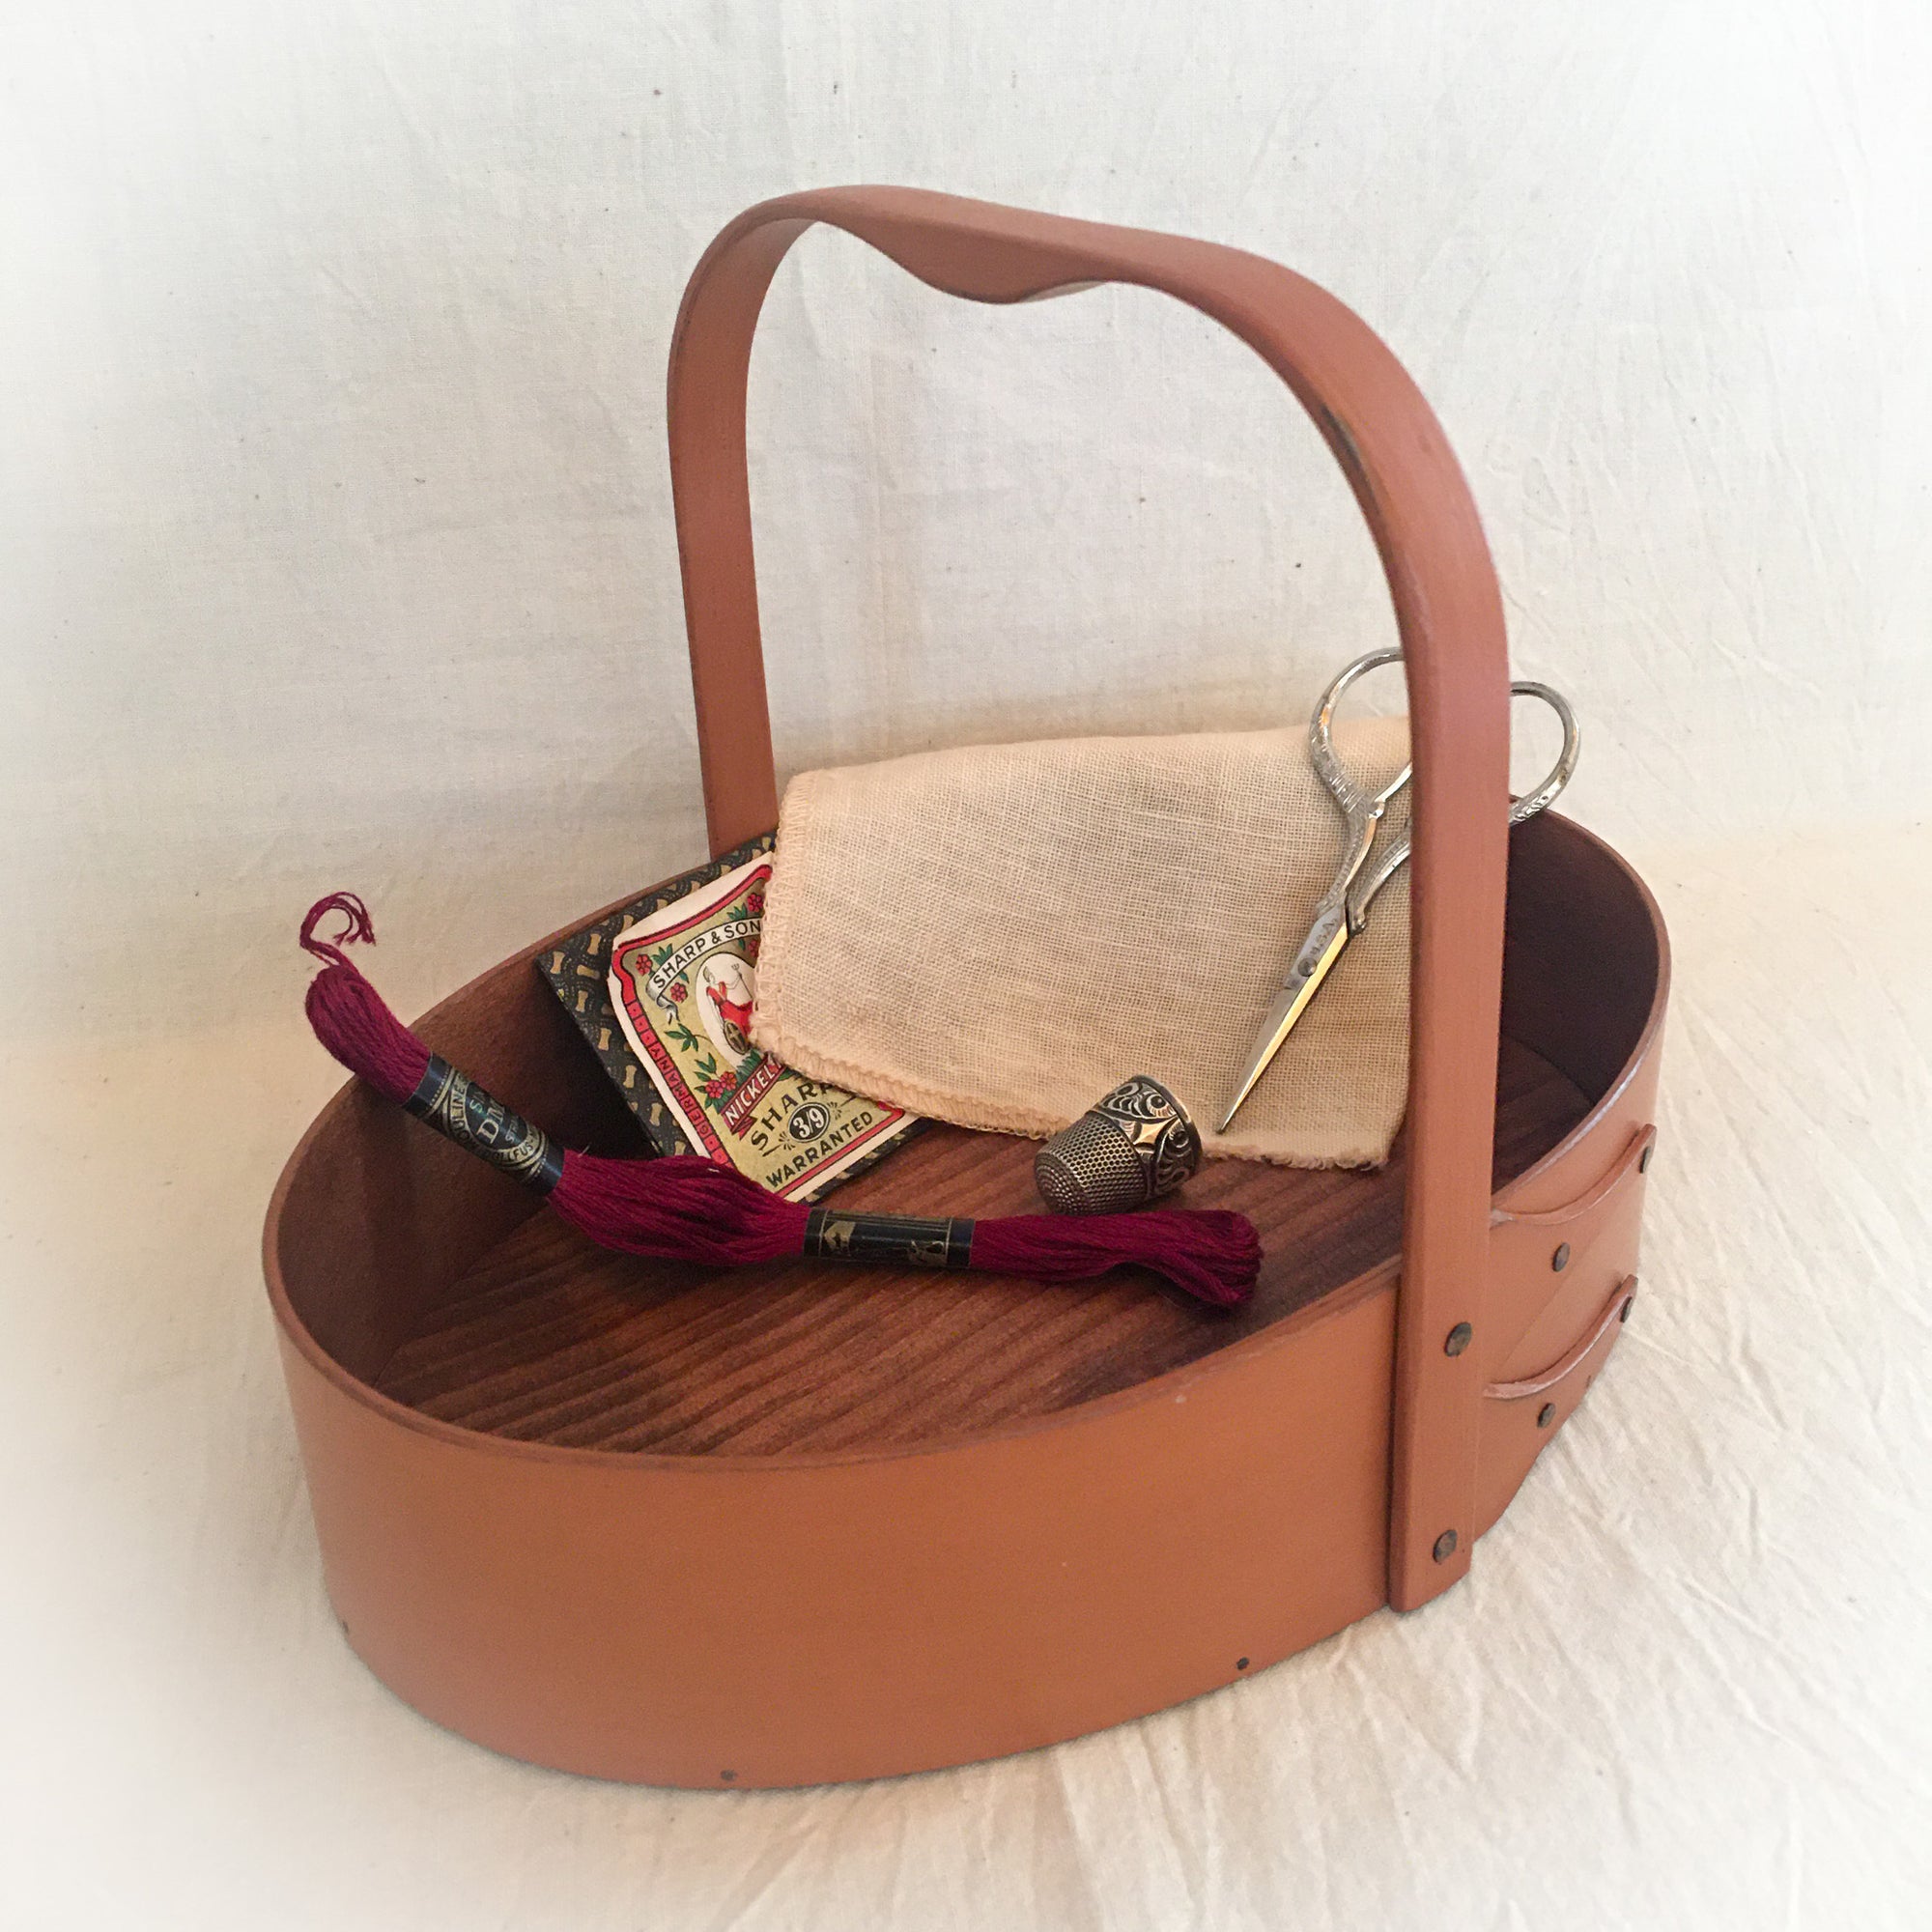 Small Shaker Style Sewing Carrier, LeHays Shaker Boxes, Handcrafted in Maine, Pumpkin Milk Paint Finish, Shown Holding Items